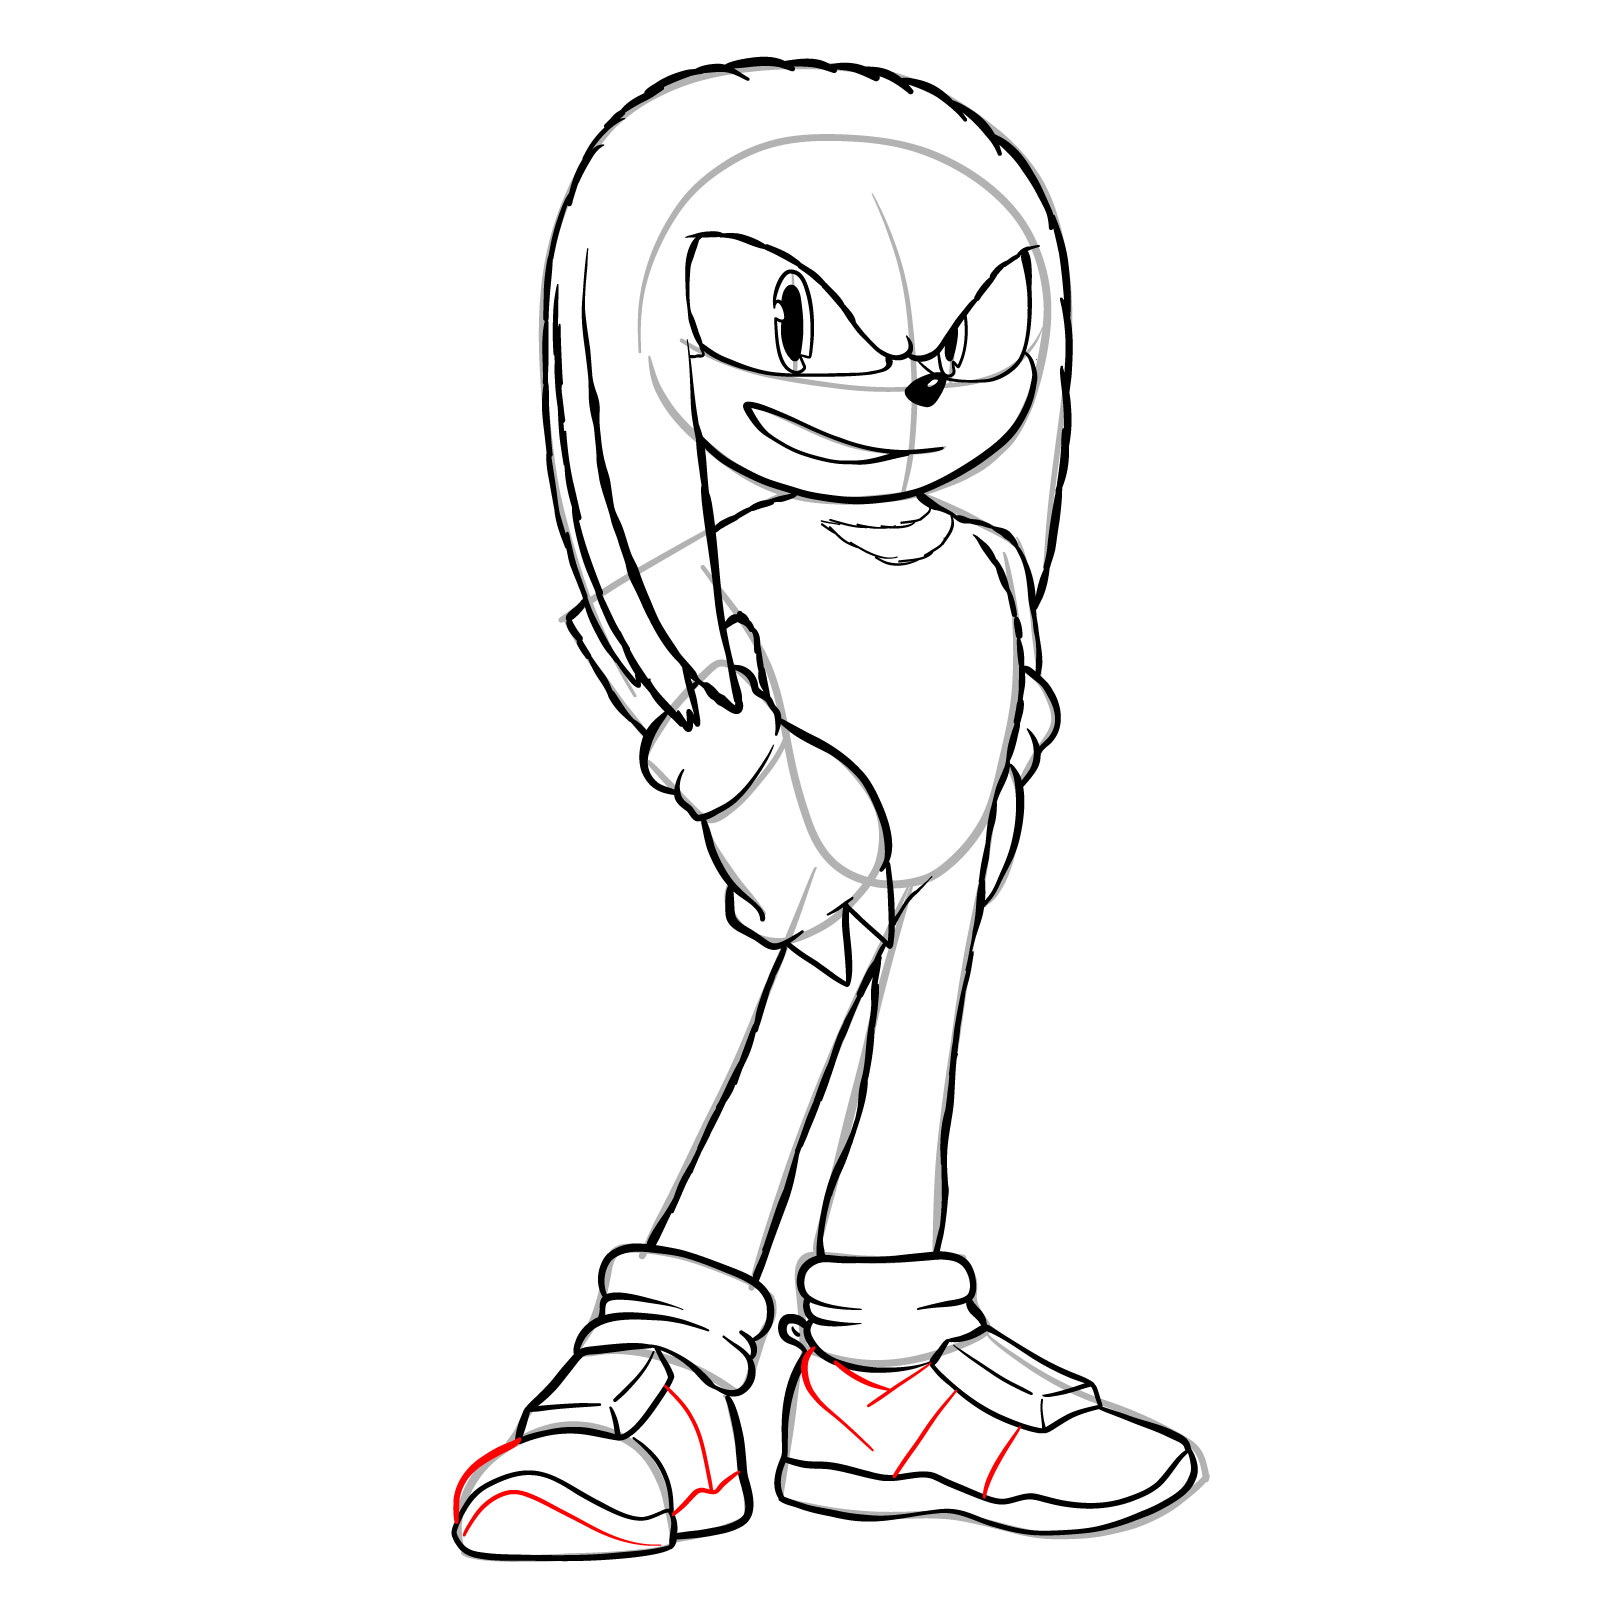 How to draw Knuckles from the movie - step 22